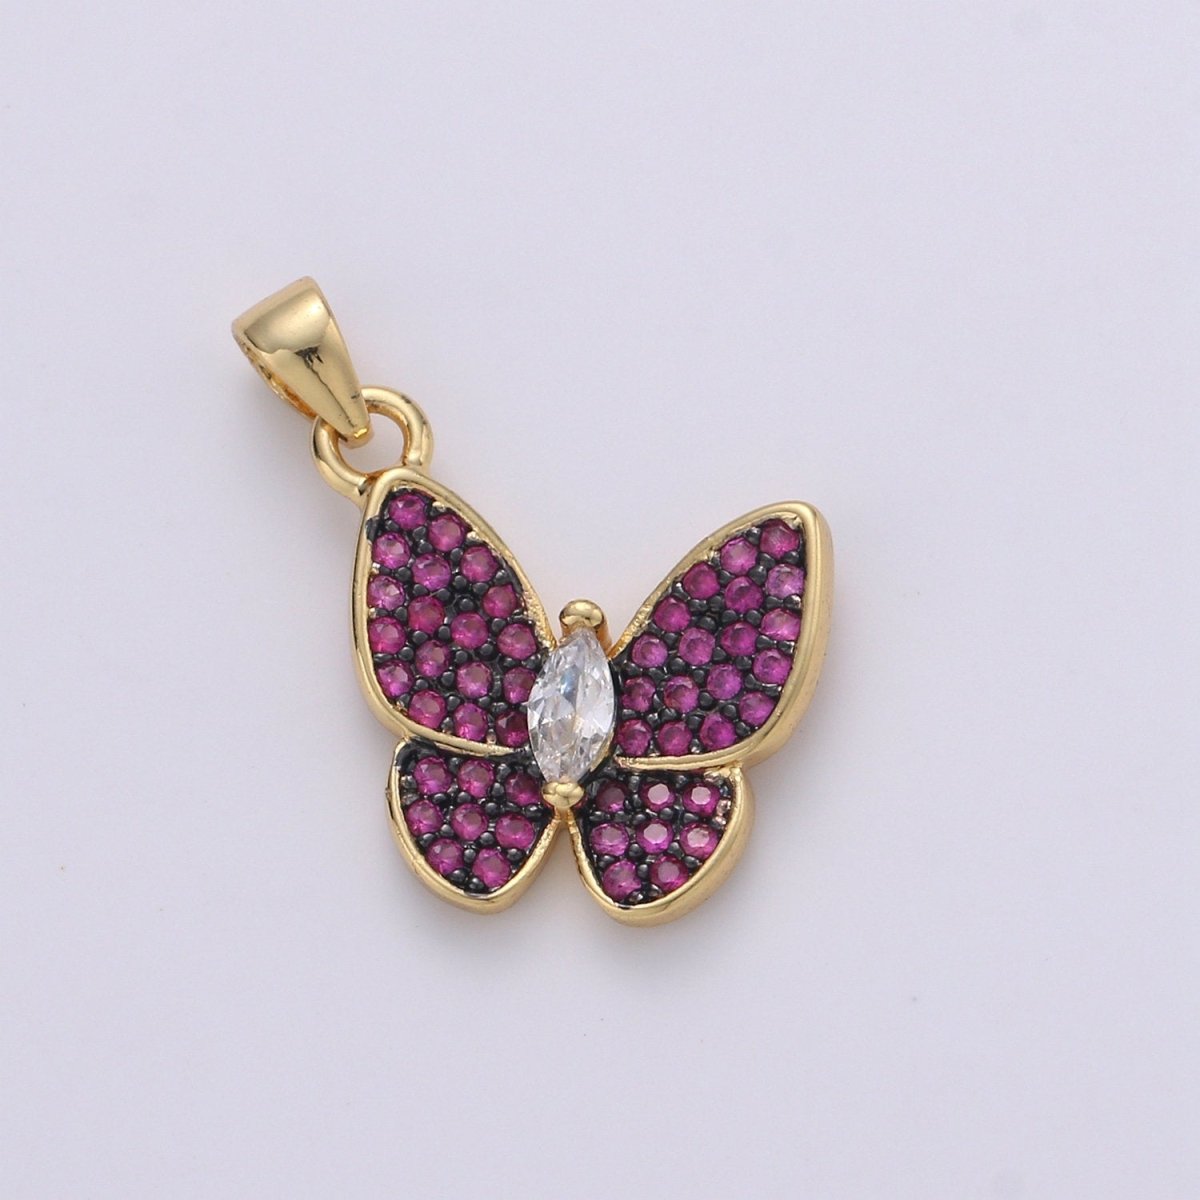 14k Gold Filled Charm Dainty Cubic Butterfly Pendant, Bracelet Charm, Necklace Pendant, Micro Pave Animal Jewelry Supply I-375~I-378 - DLUXCA